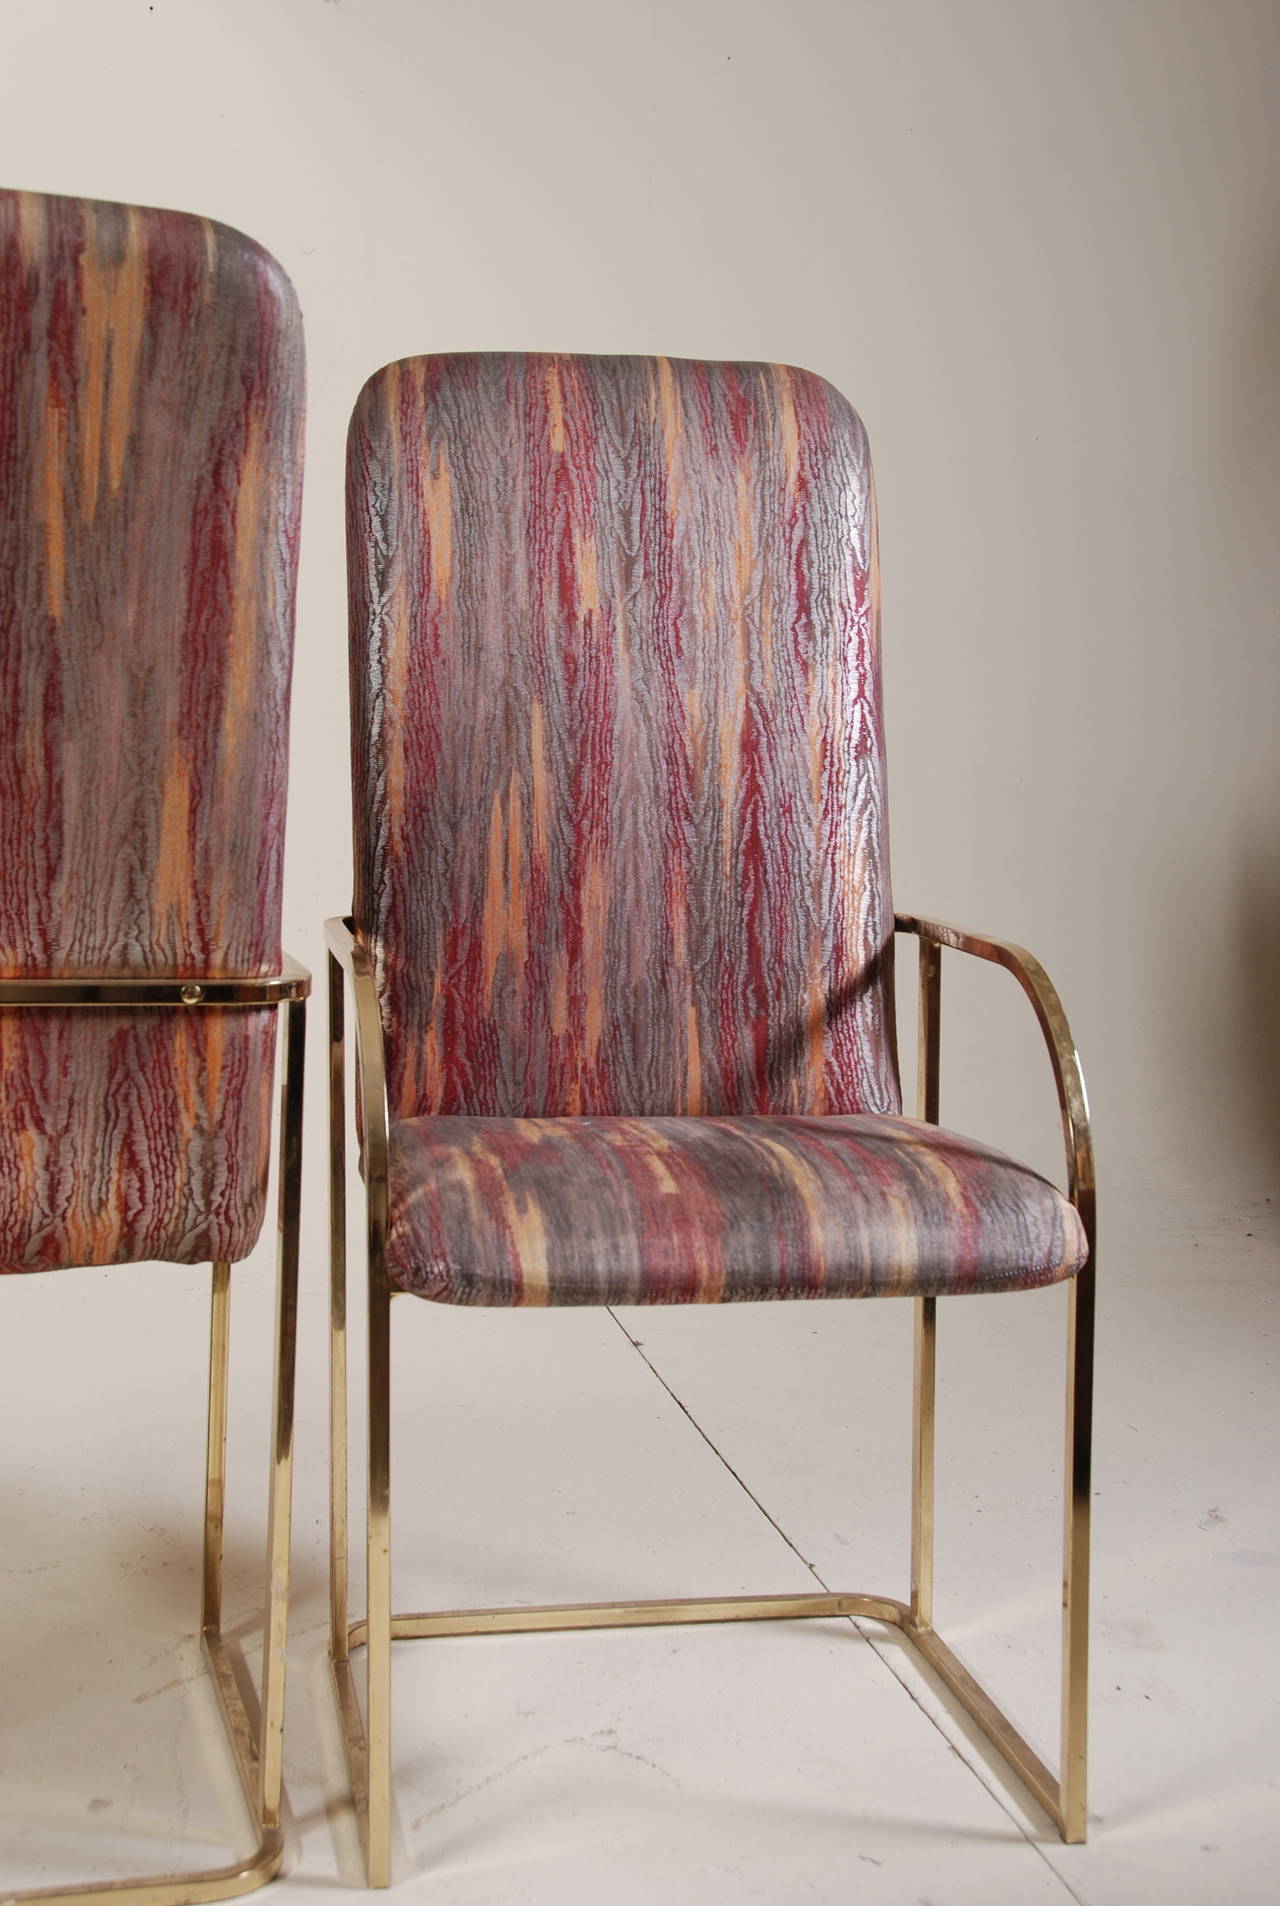 American Pair of Brass Chairs by Milo Baughman for the Design Institute of America